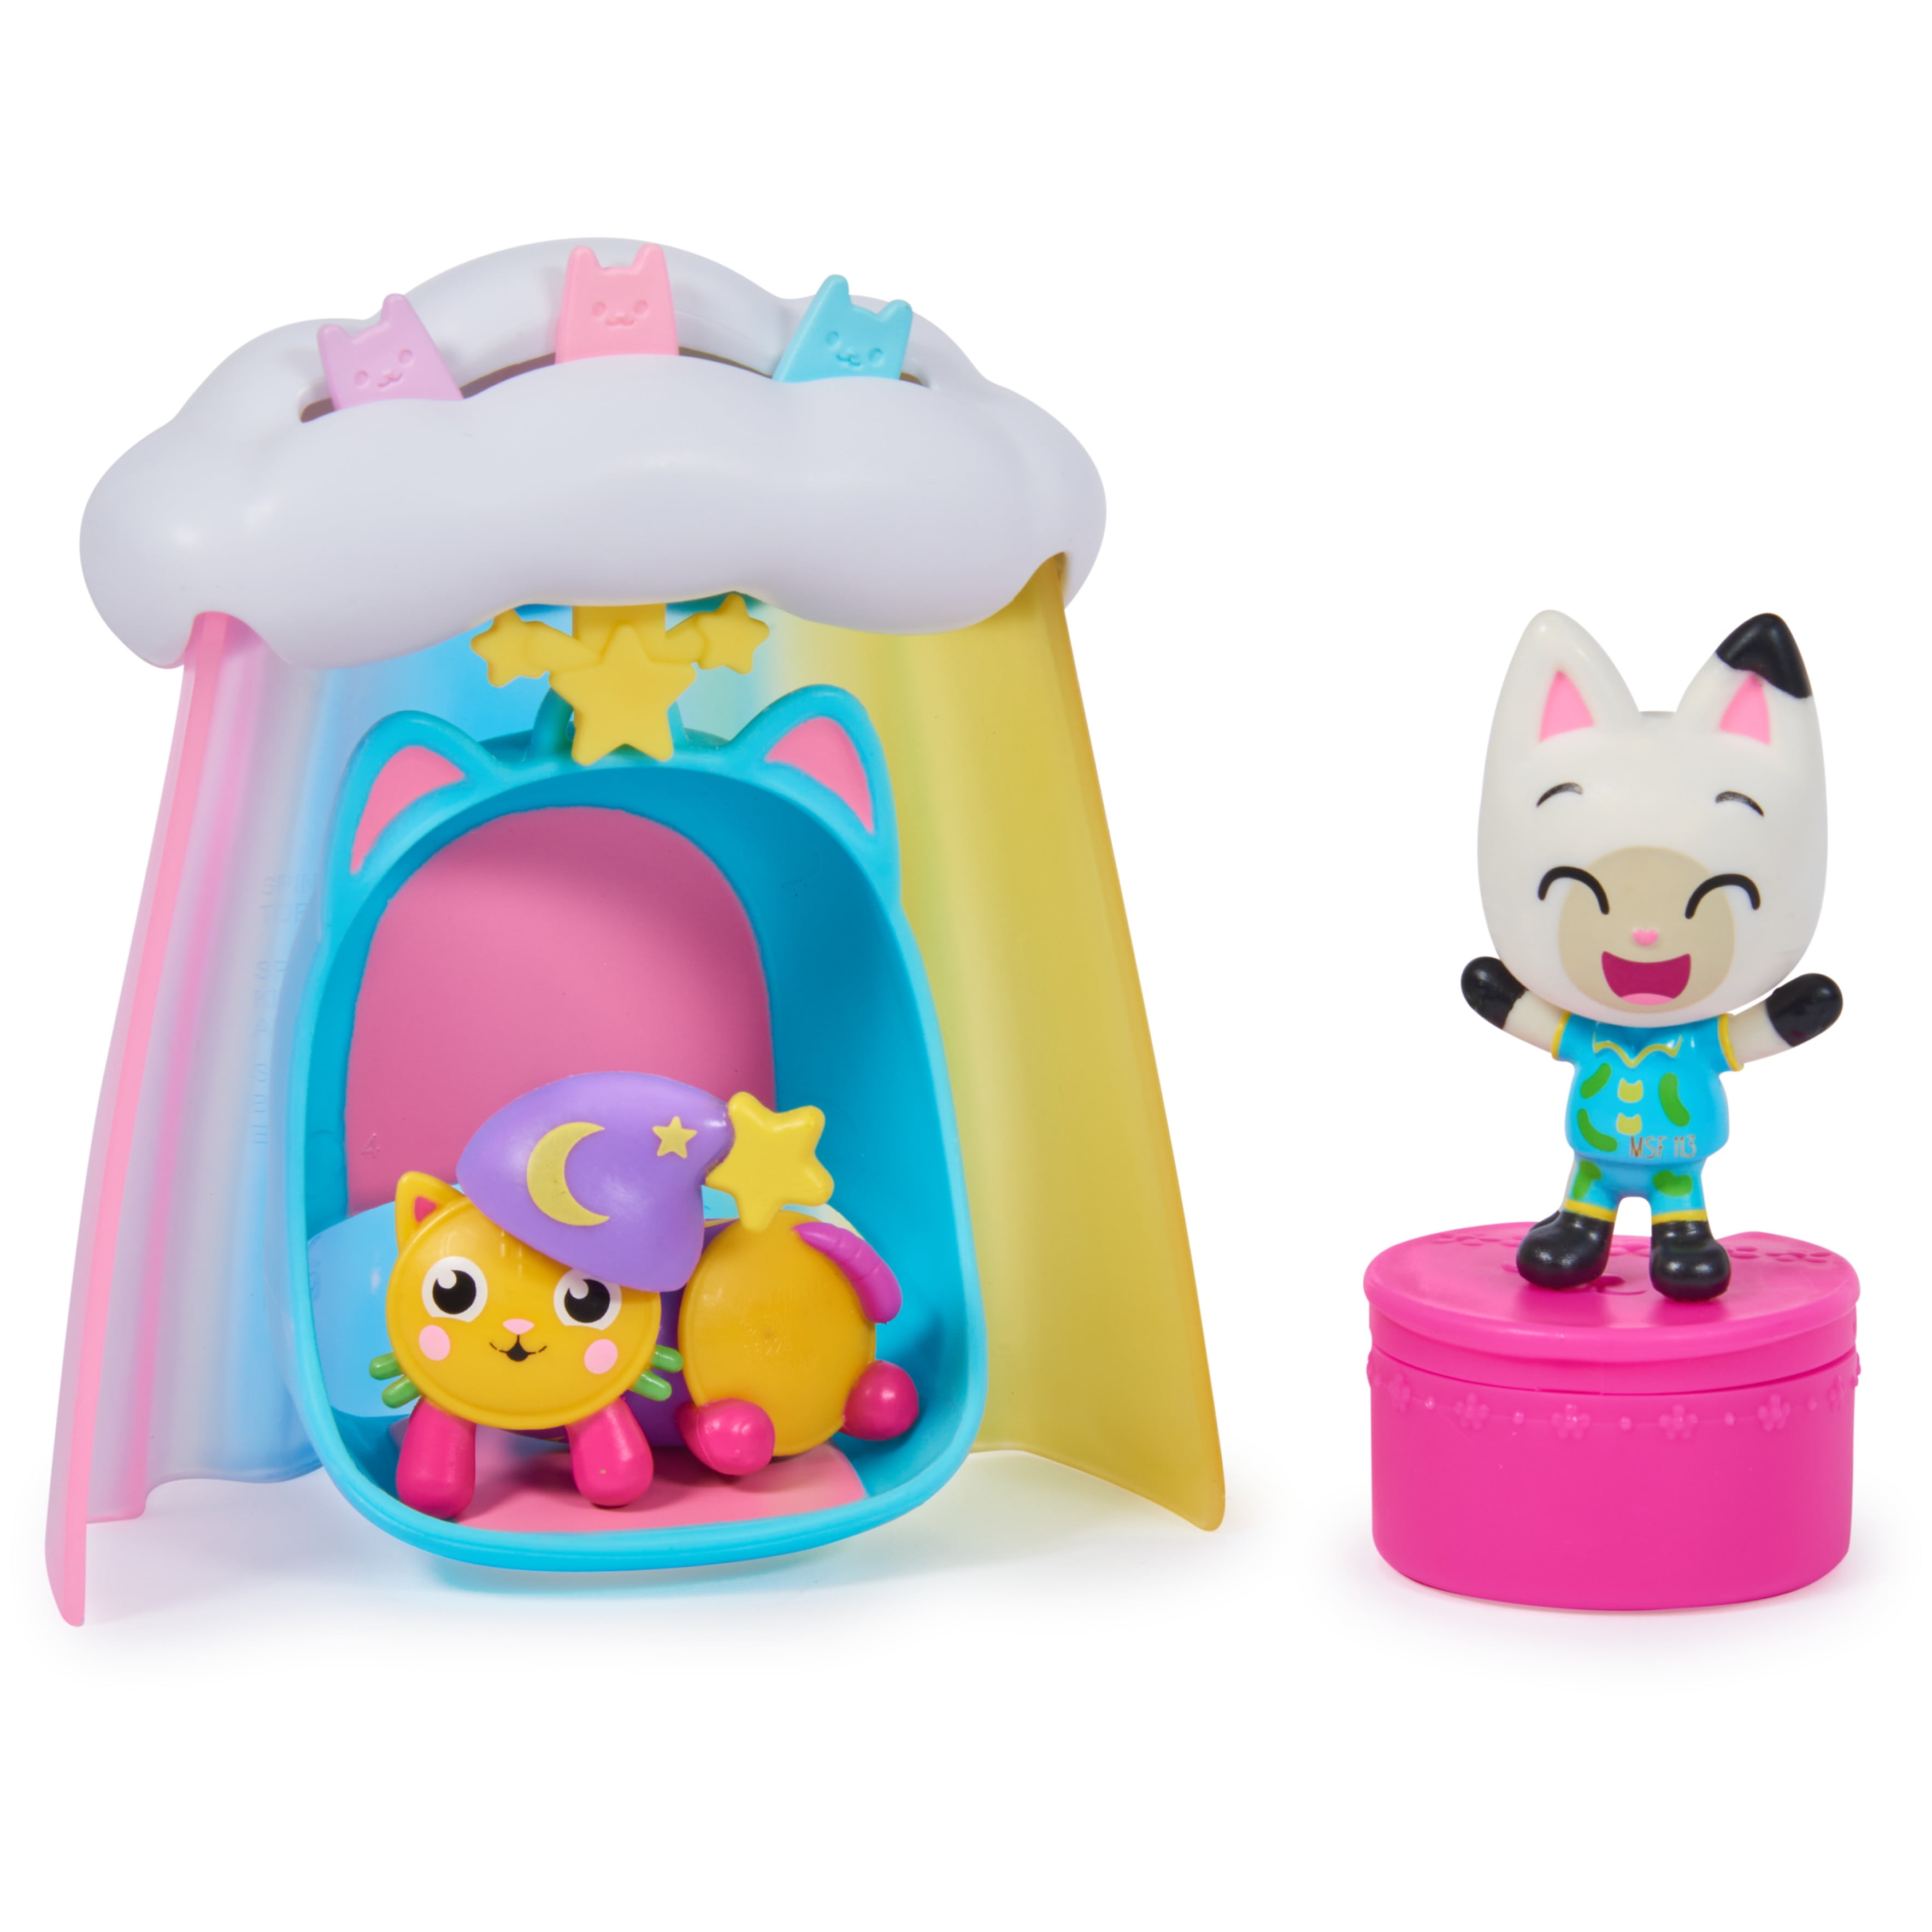 Gabby's Dollhouse Toys: Paw-Tastic Pajama Party Playset $6.97, Cat Friend Cruise Ship Playset $35, More + Free S&H w/ Walmart+ or $35+